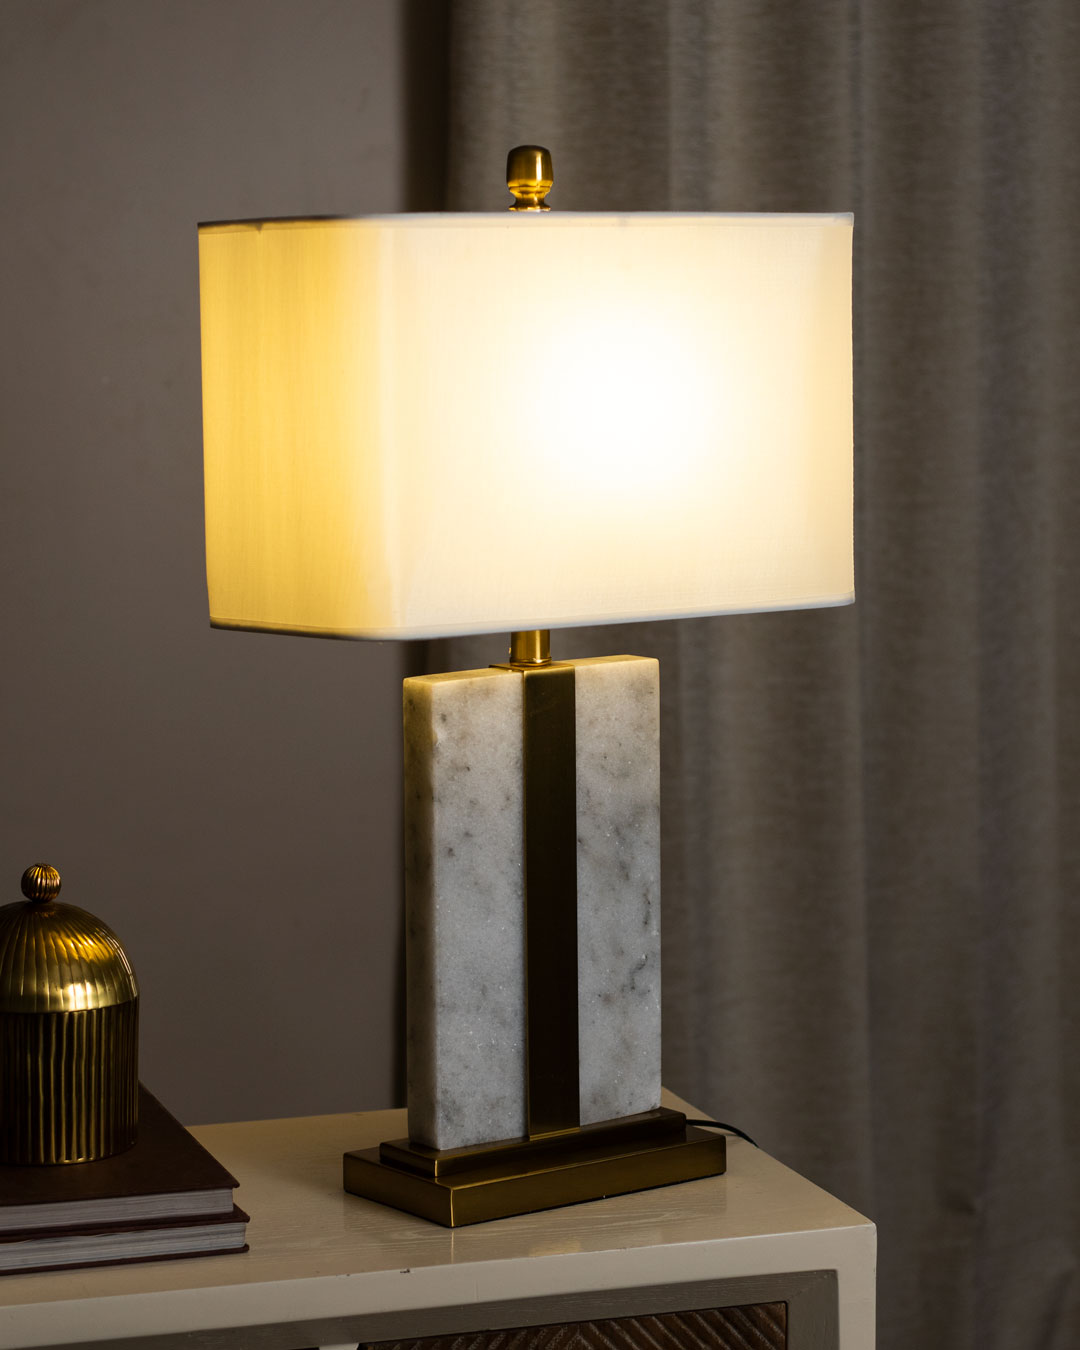 Marble Console Table Lamp